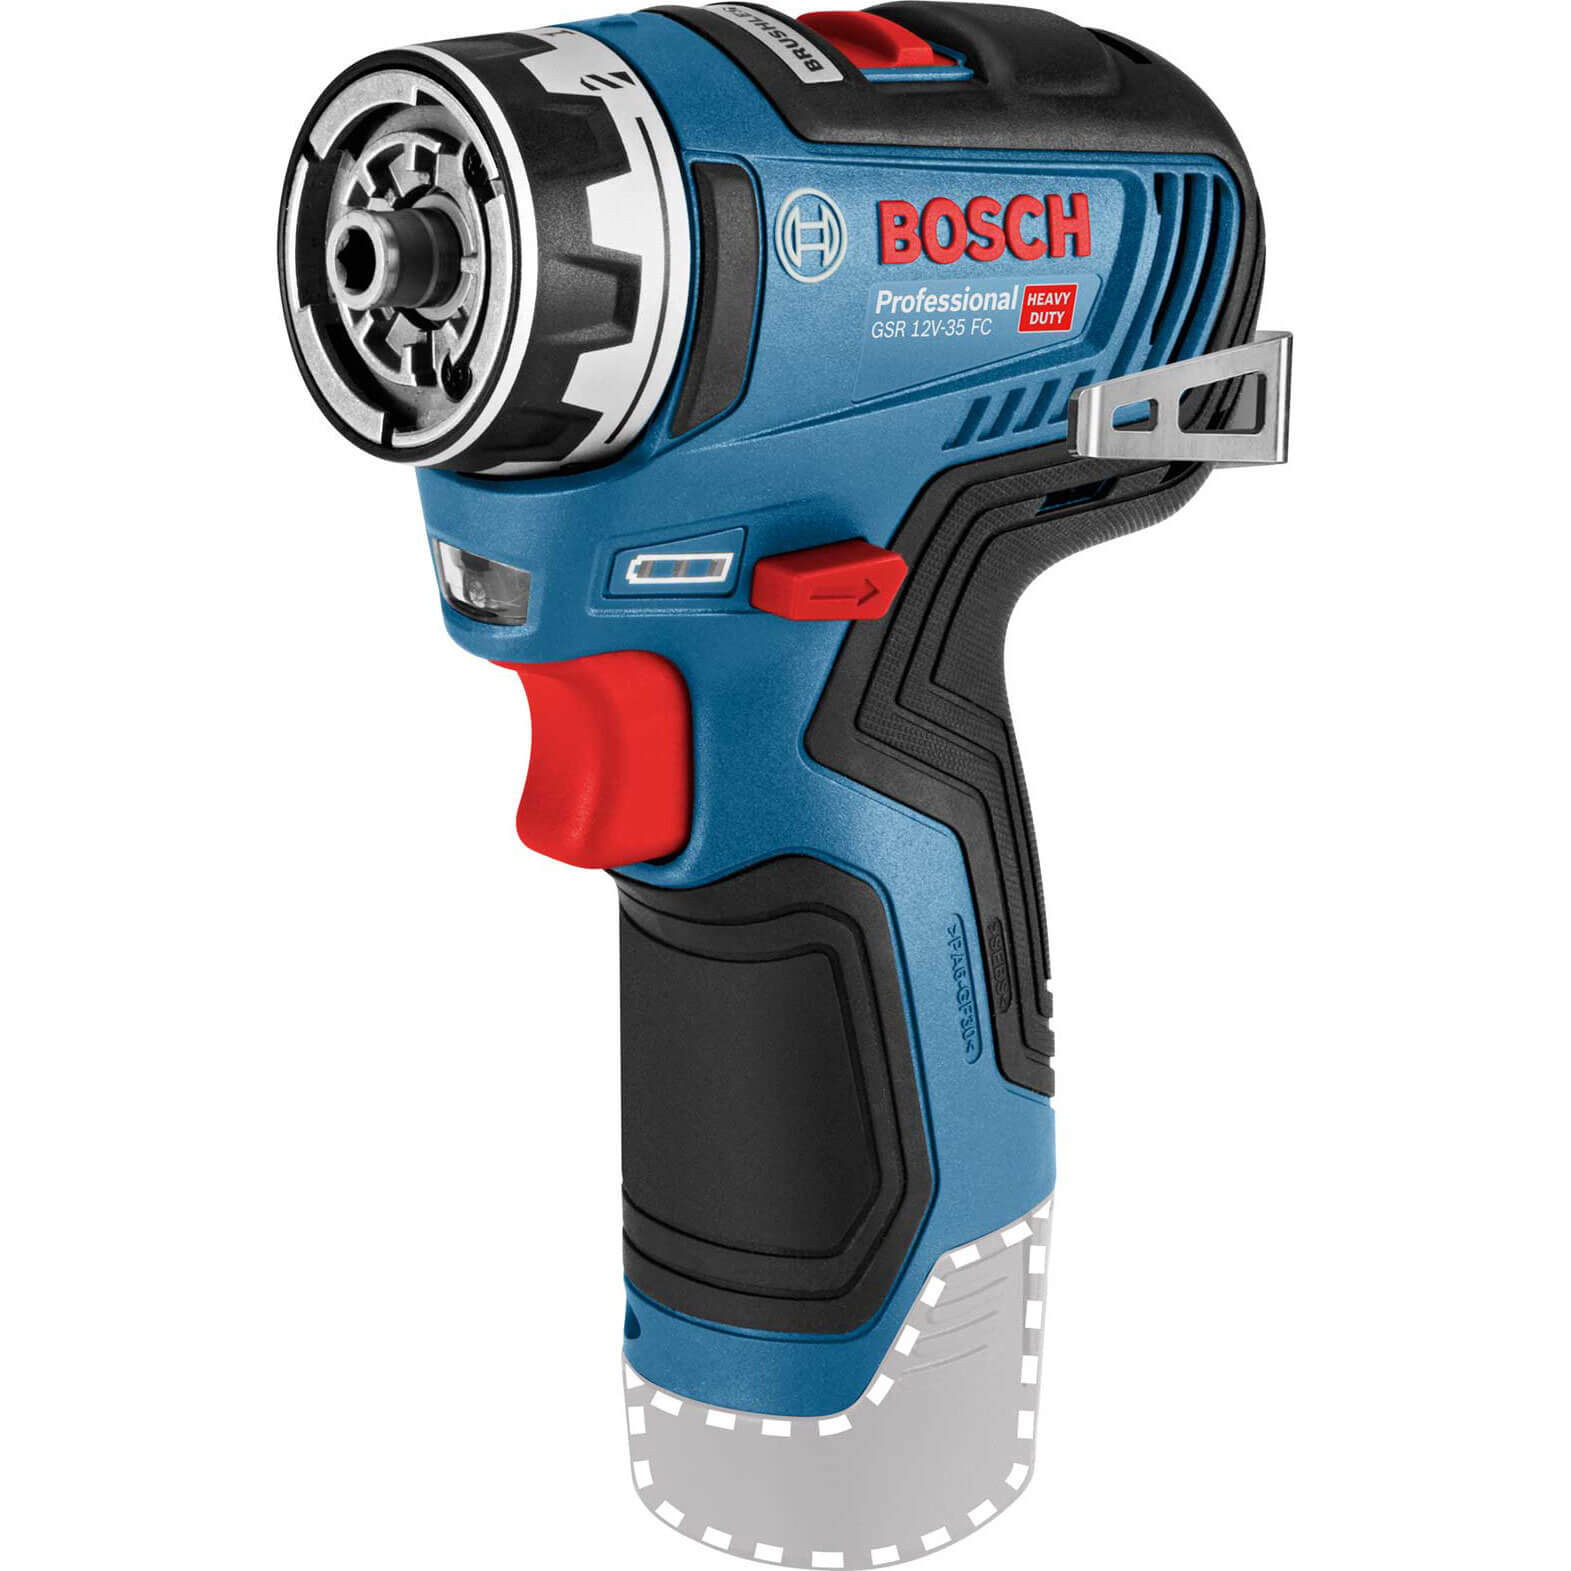 Image of Bosch GSR 12V-35 FC 12v Cordless Brushless Drill Driver No Batteries No Charger No Case